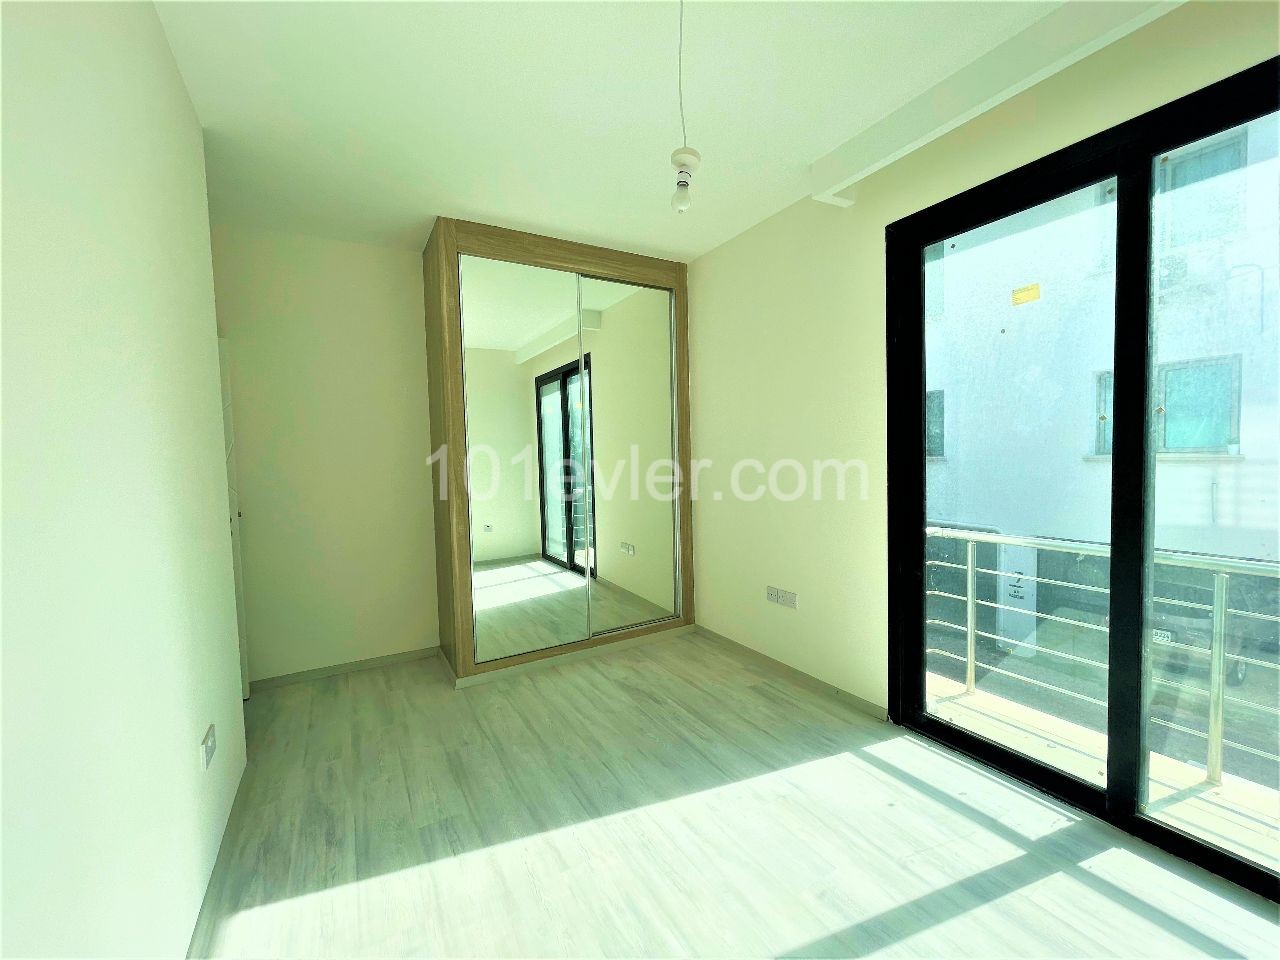 For sale brand new 2+1 apartments in city center!